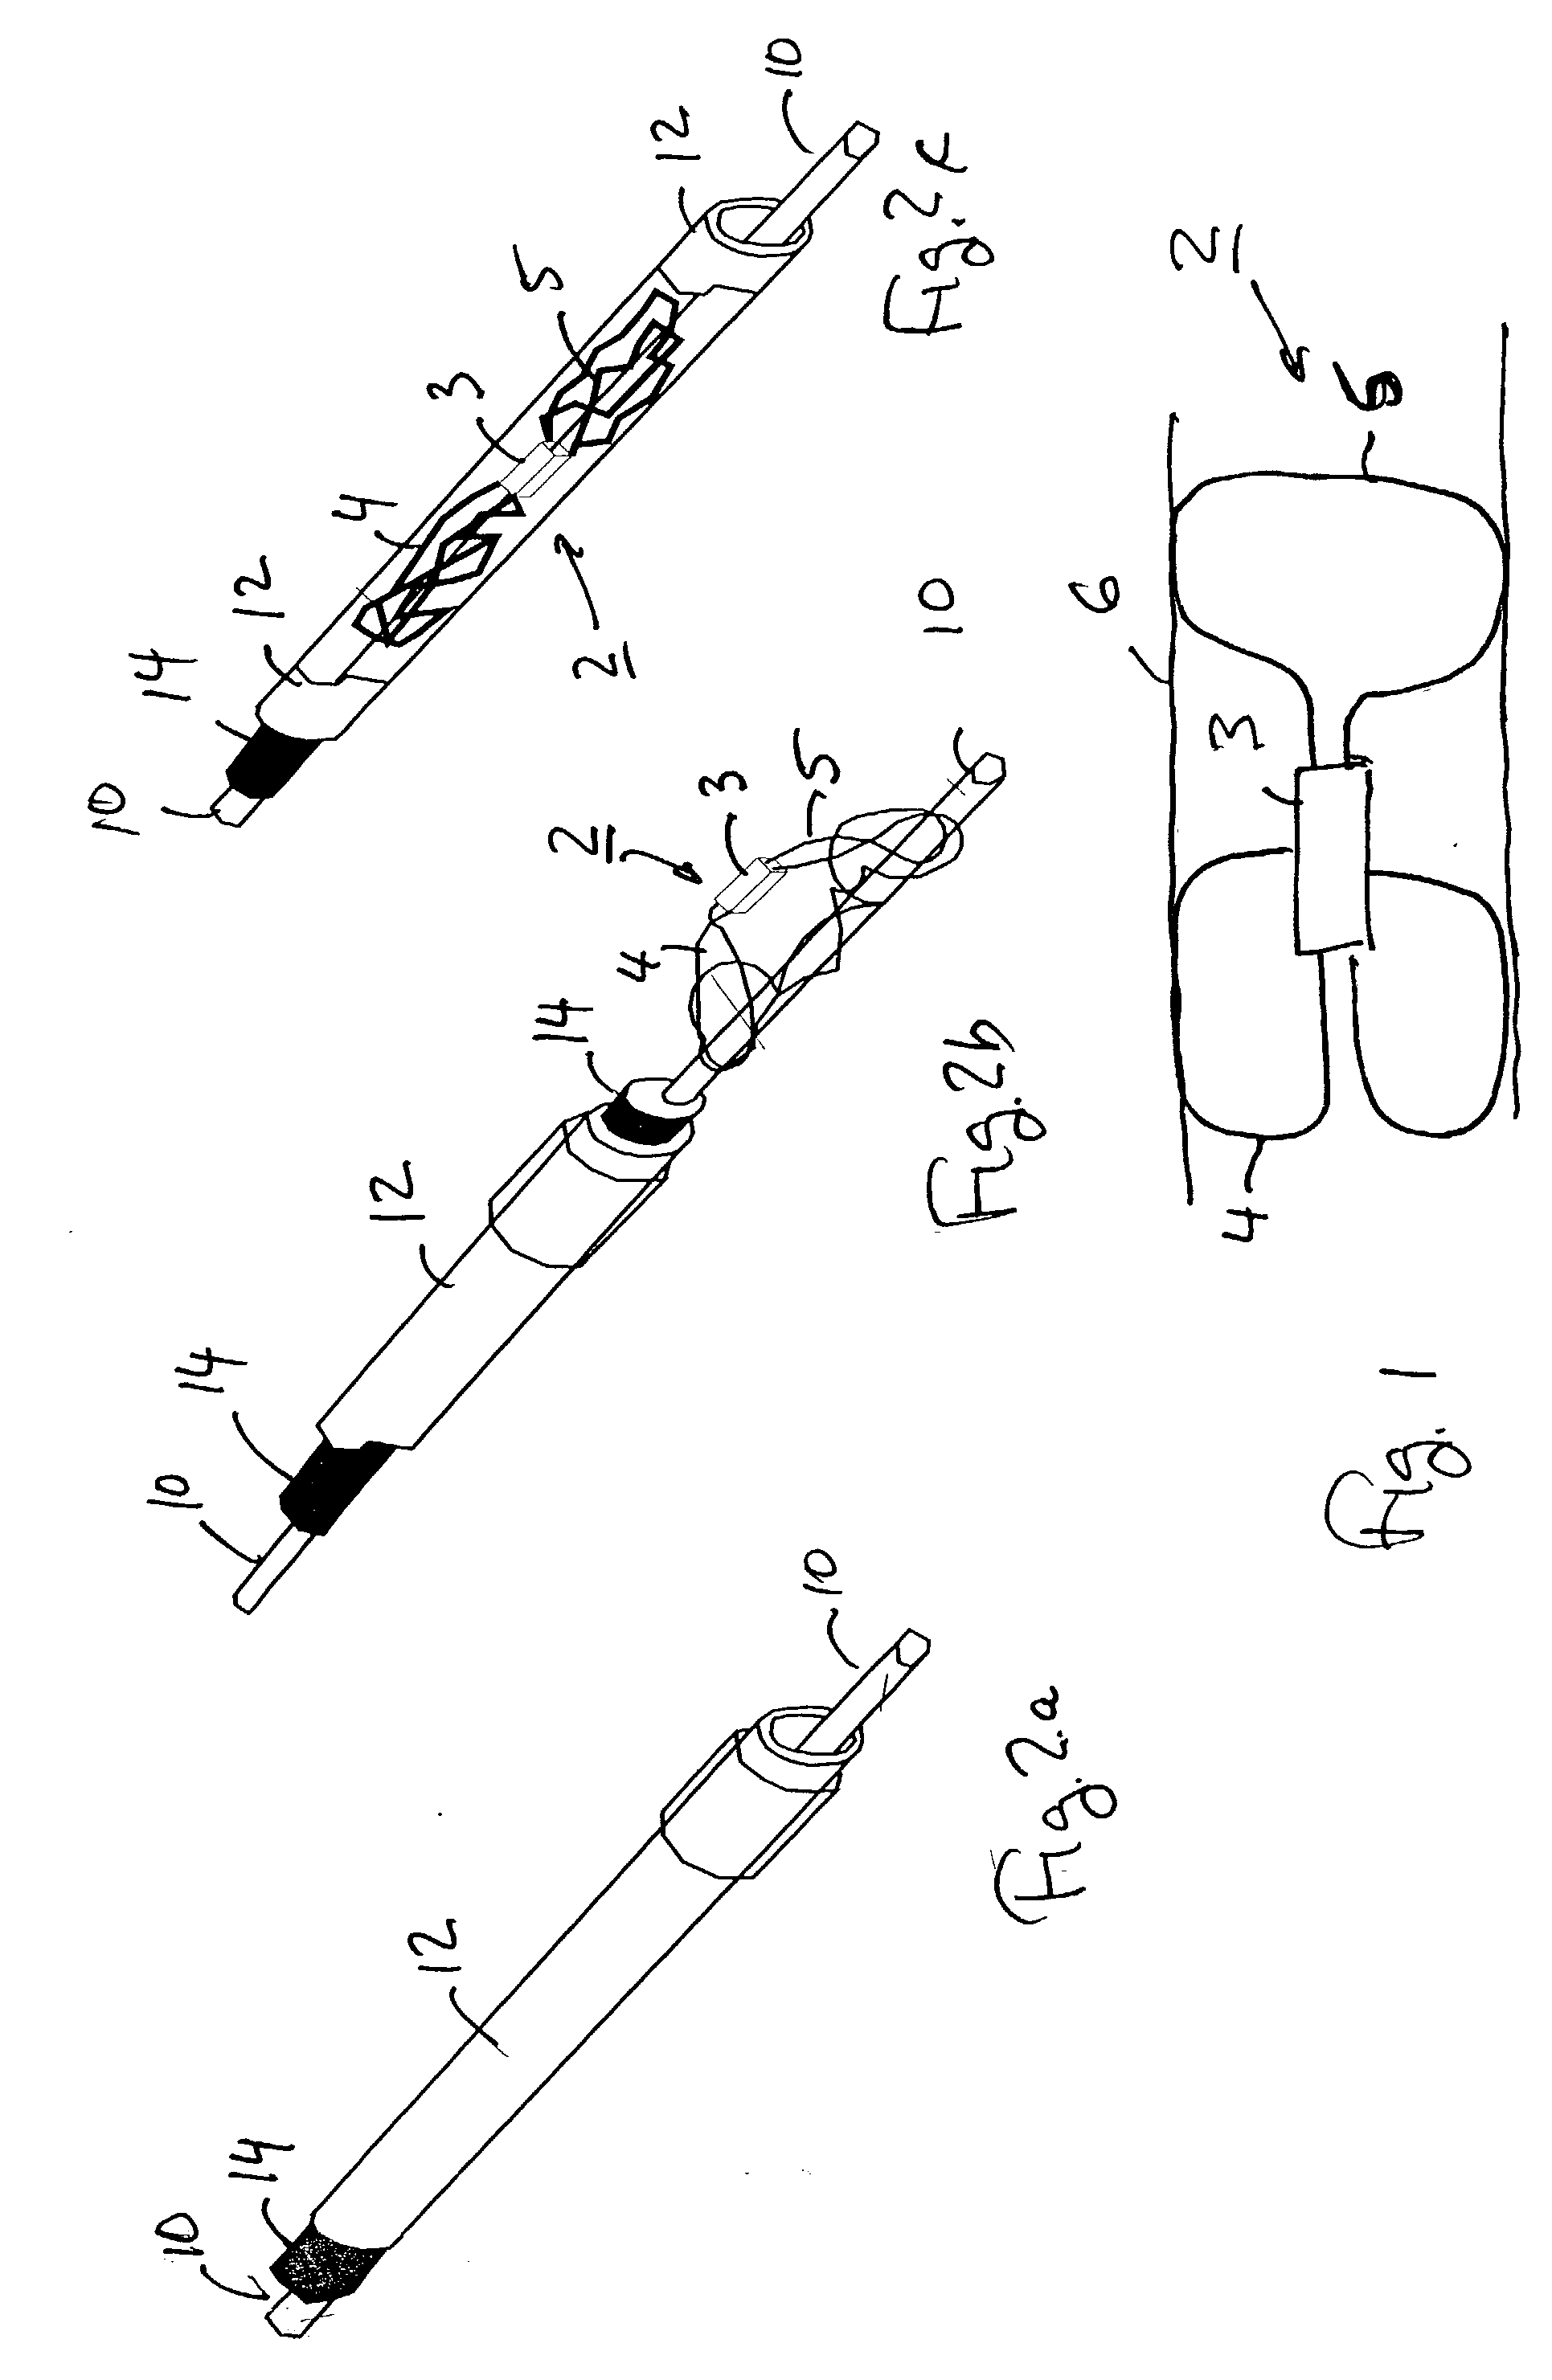 Deployment device, system and method for medical implantation